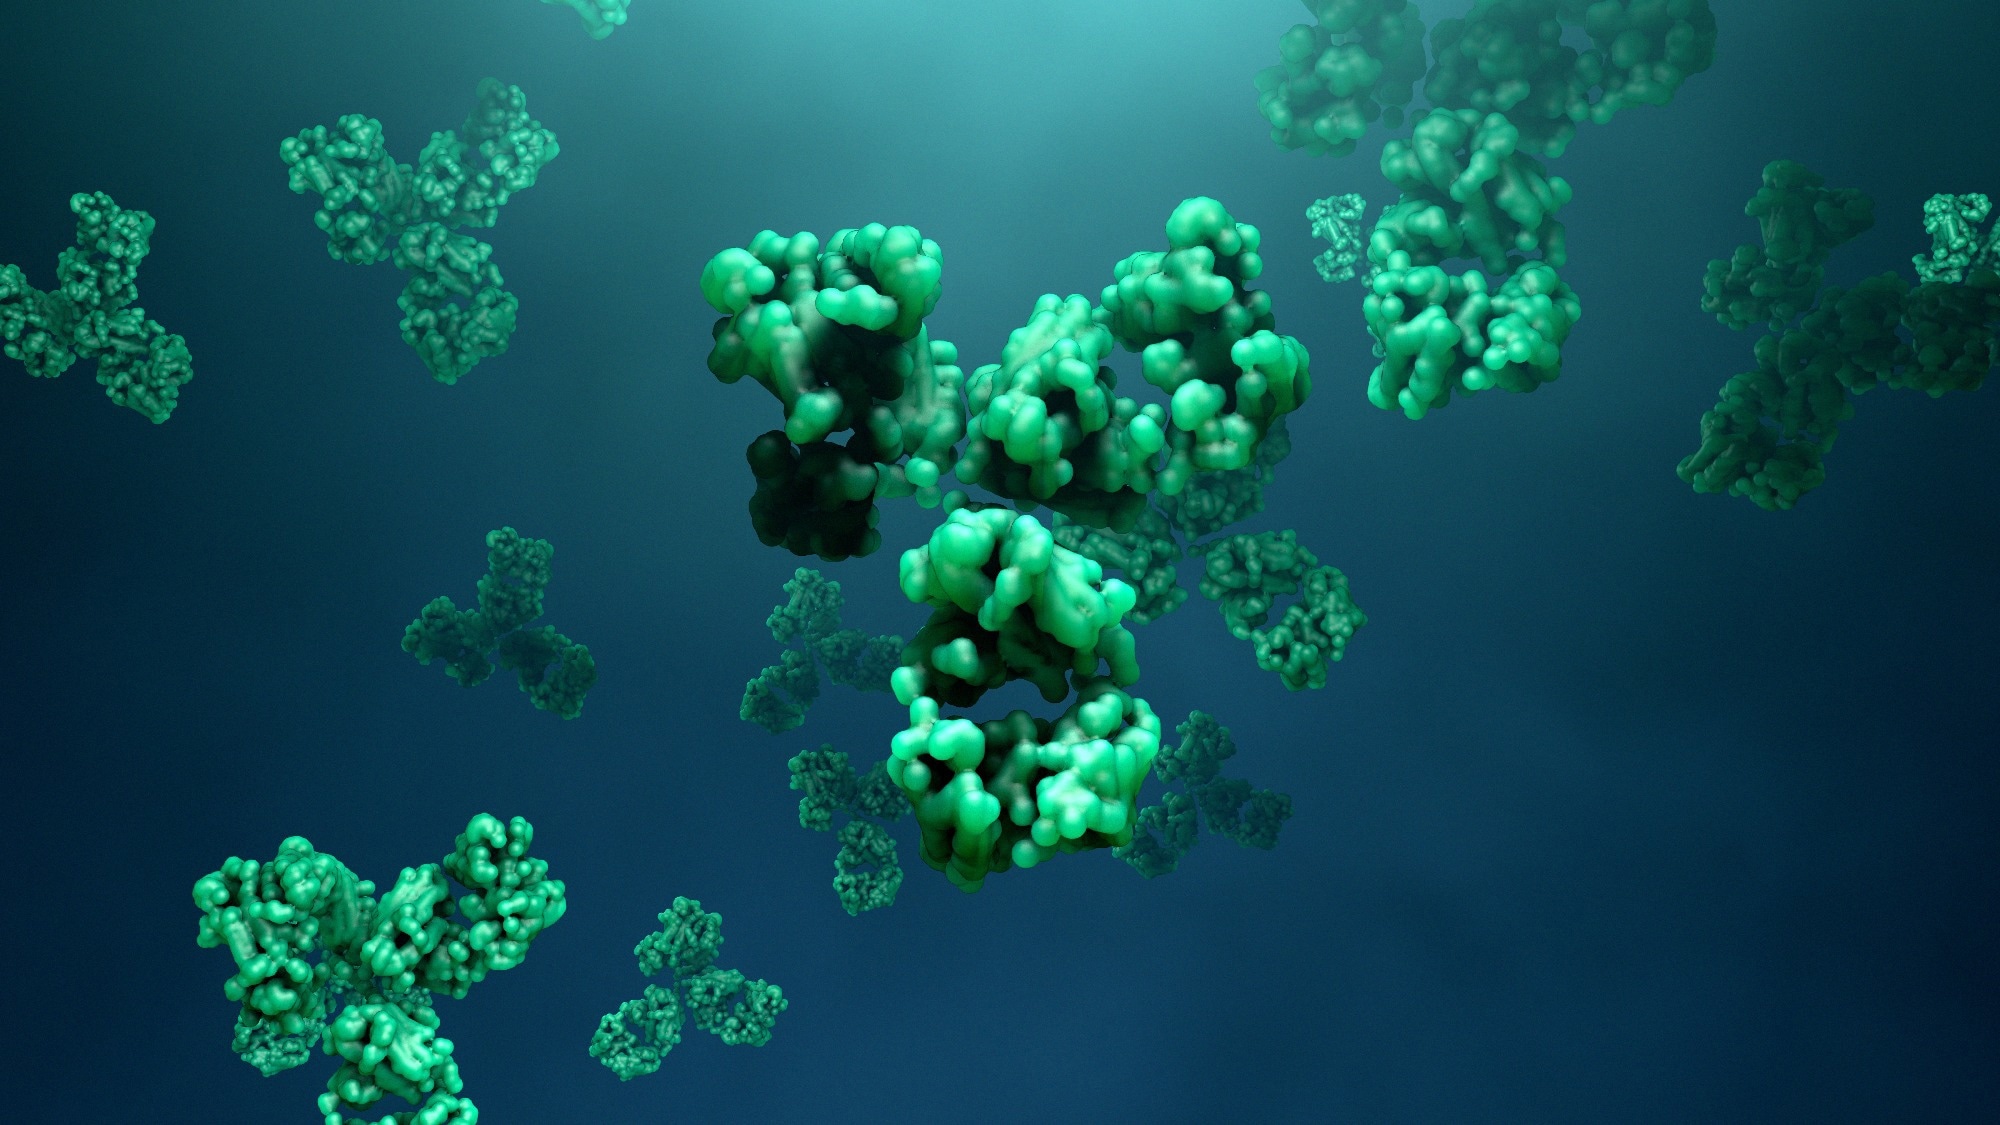 Study: Antibody-mediated protection against symptomatic COVID-19 can be achieved at low serum neutralizing titers. Image Credit: Design_Cells / Shutterstock